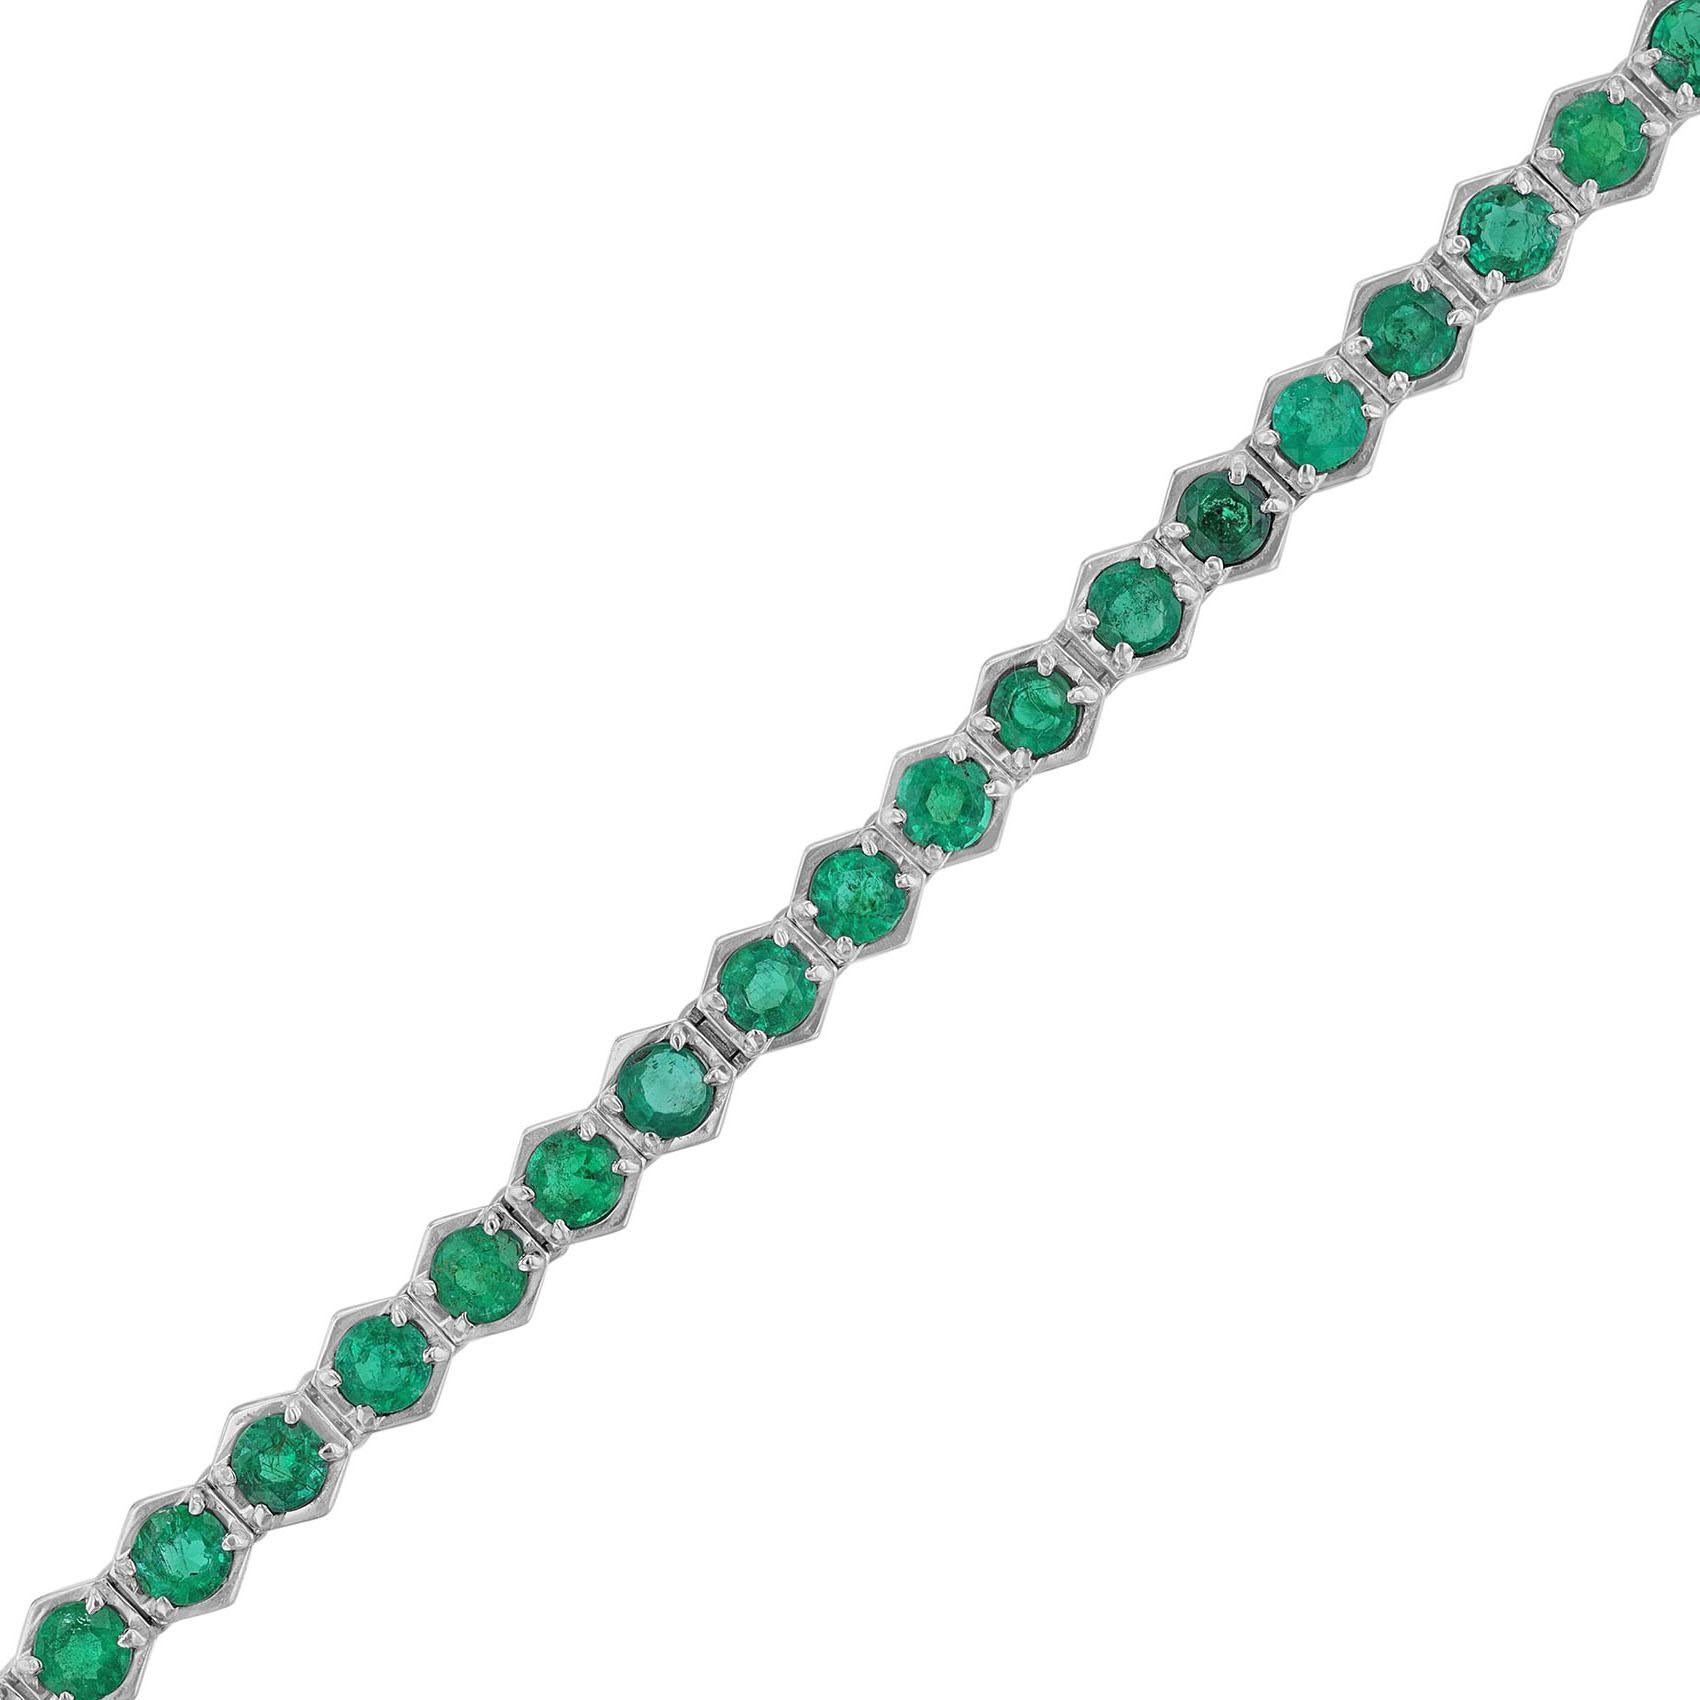 This bracelet is made in 18K white gold. It features 42 round cut emeralds in hexagon bezels. It weighs 3.94 carats. 